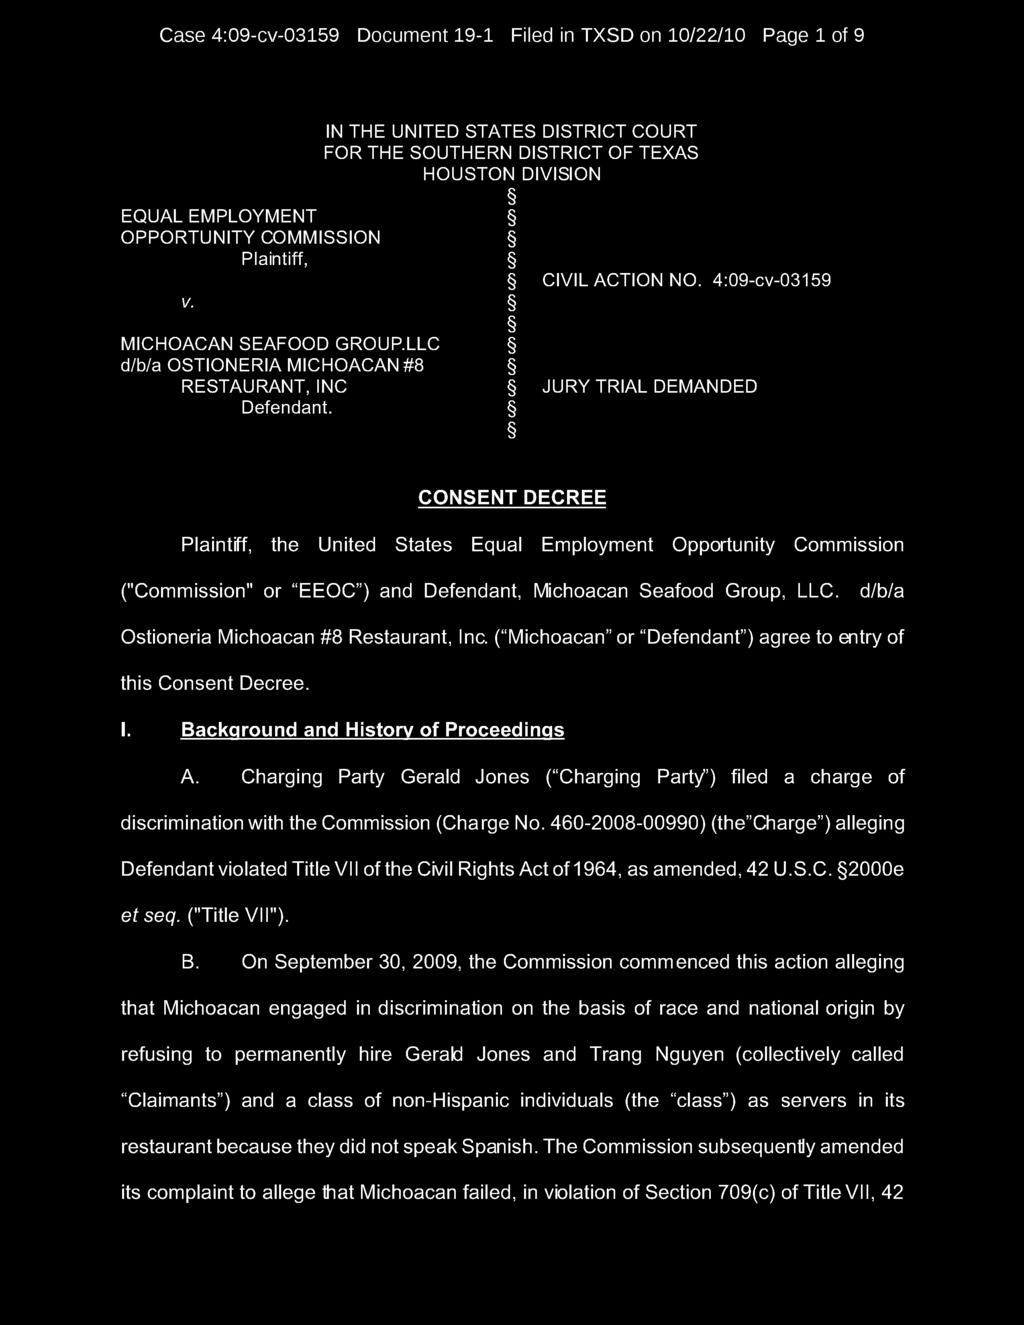 CONSENT DECREE Plaintiff, the United States Equal Employment Opportunity Commission ("Commission" or EEOC ) and Defendant, Michoacan Seafood Group, LLC. d/b/a Ostioneria Michoacan #8 Restaurant, Inc.